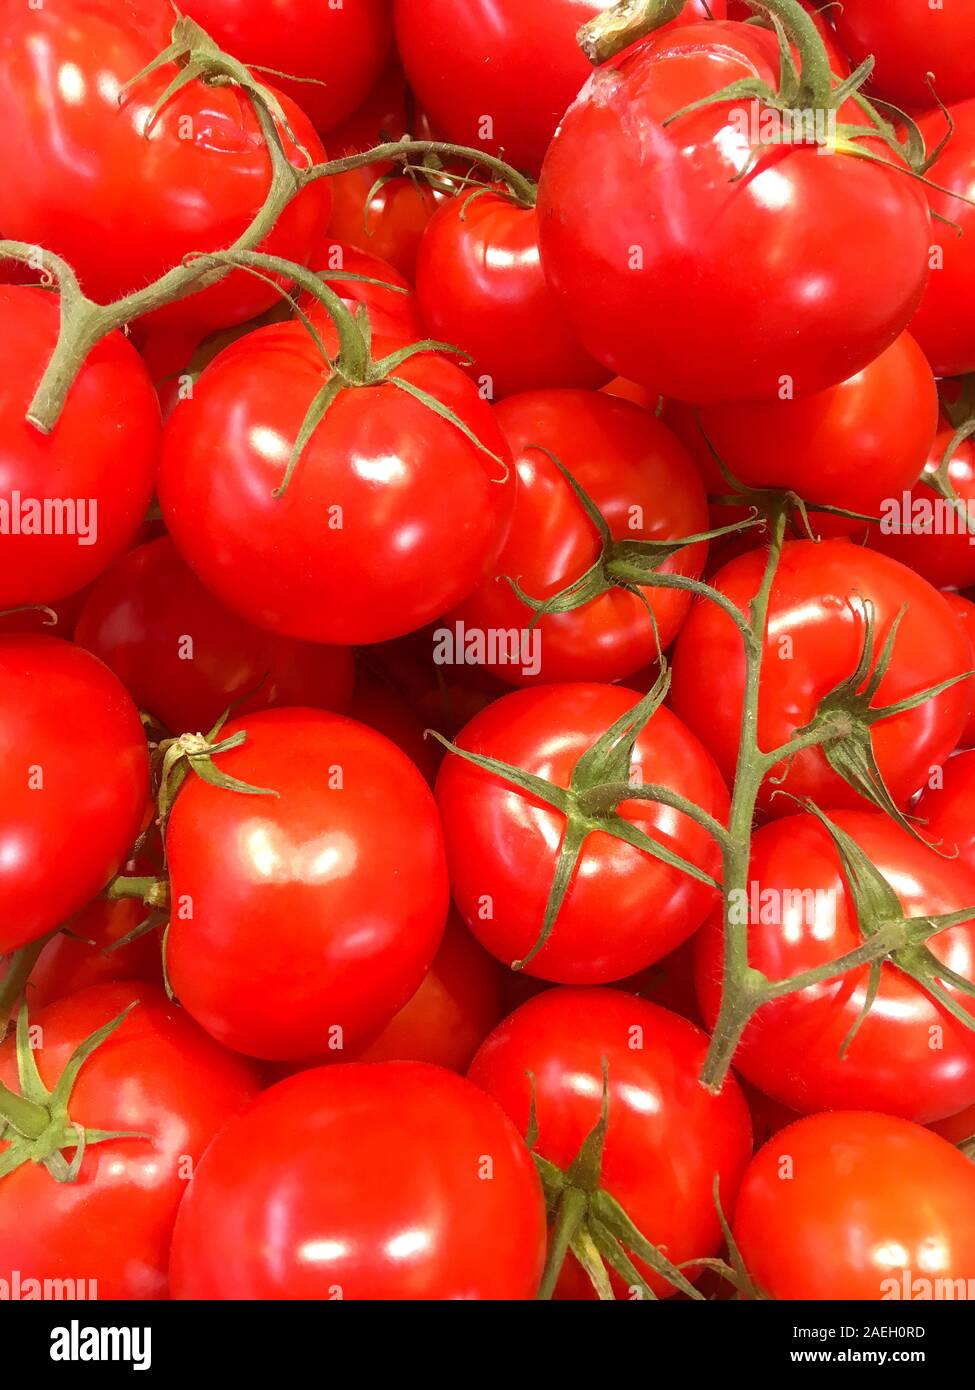 Trusses of tomatoes, supermarket, Lyon, France Stock Photo